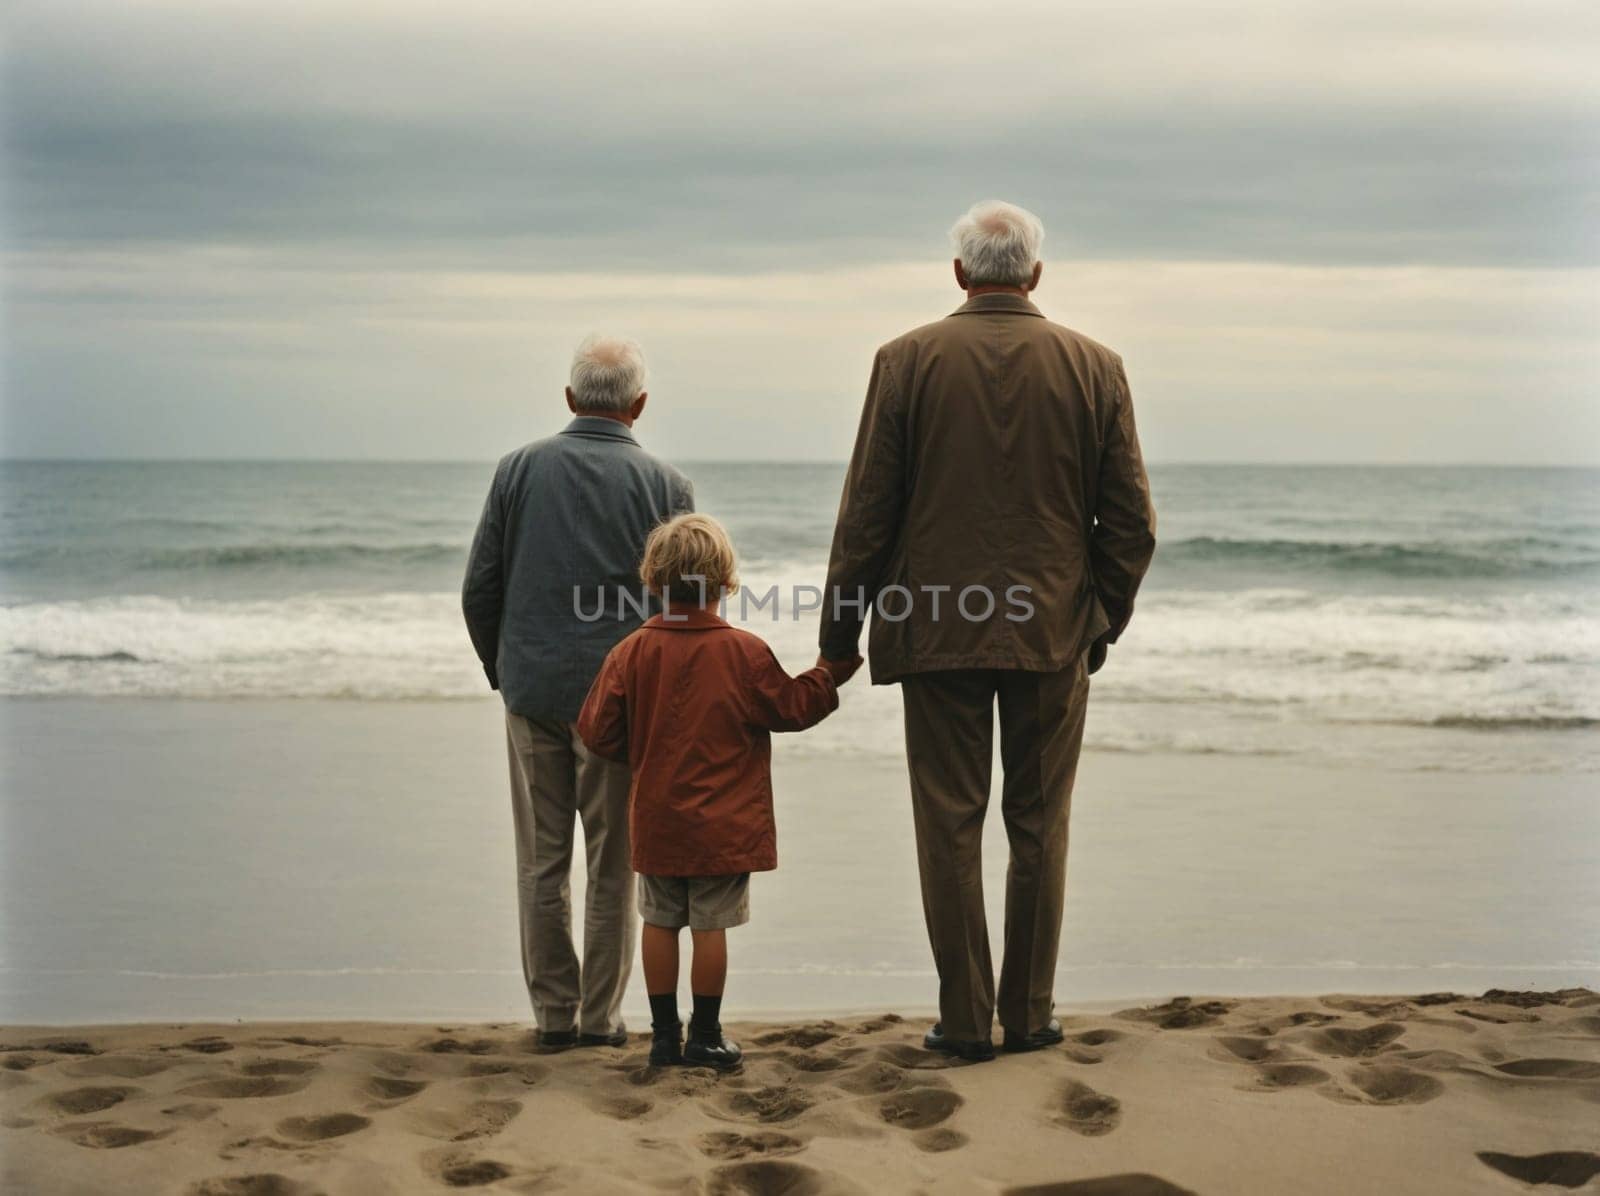 An older couple and a young child enjoy a peaceful moment standing together on a beautiful beach.